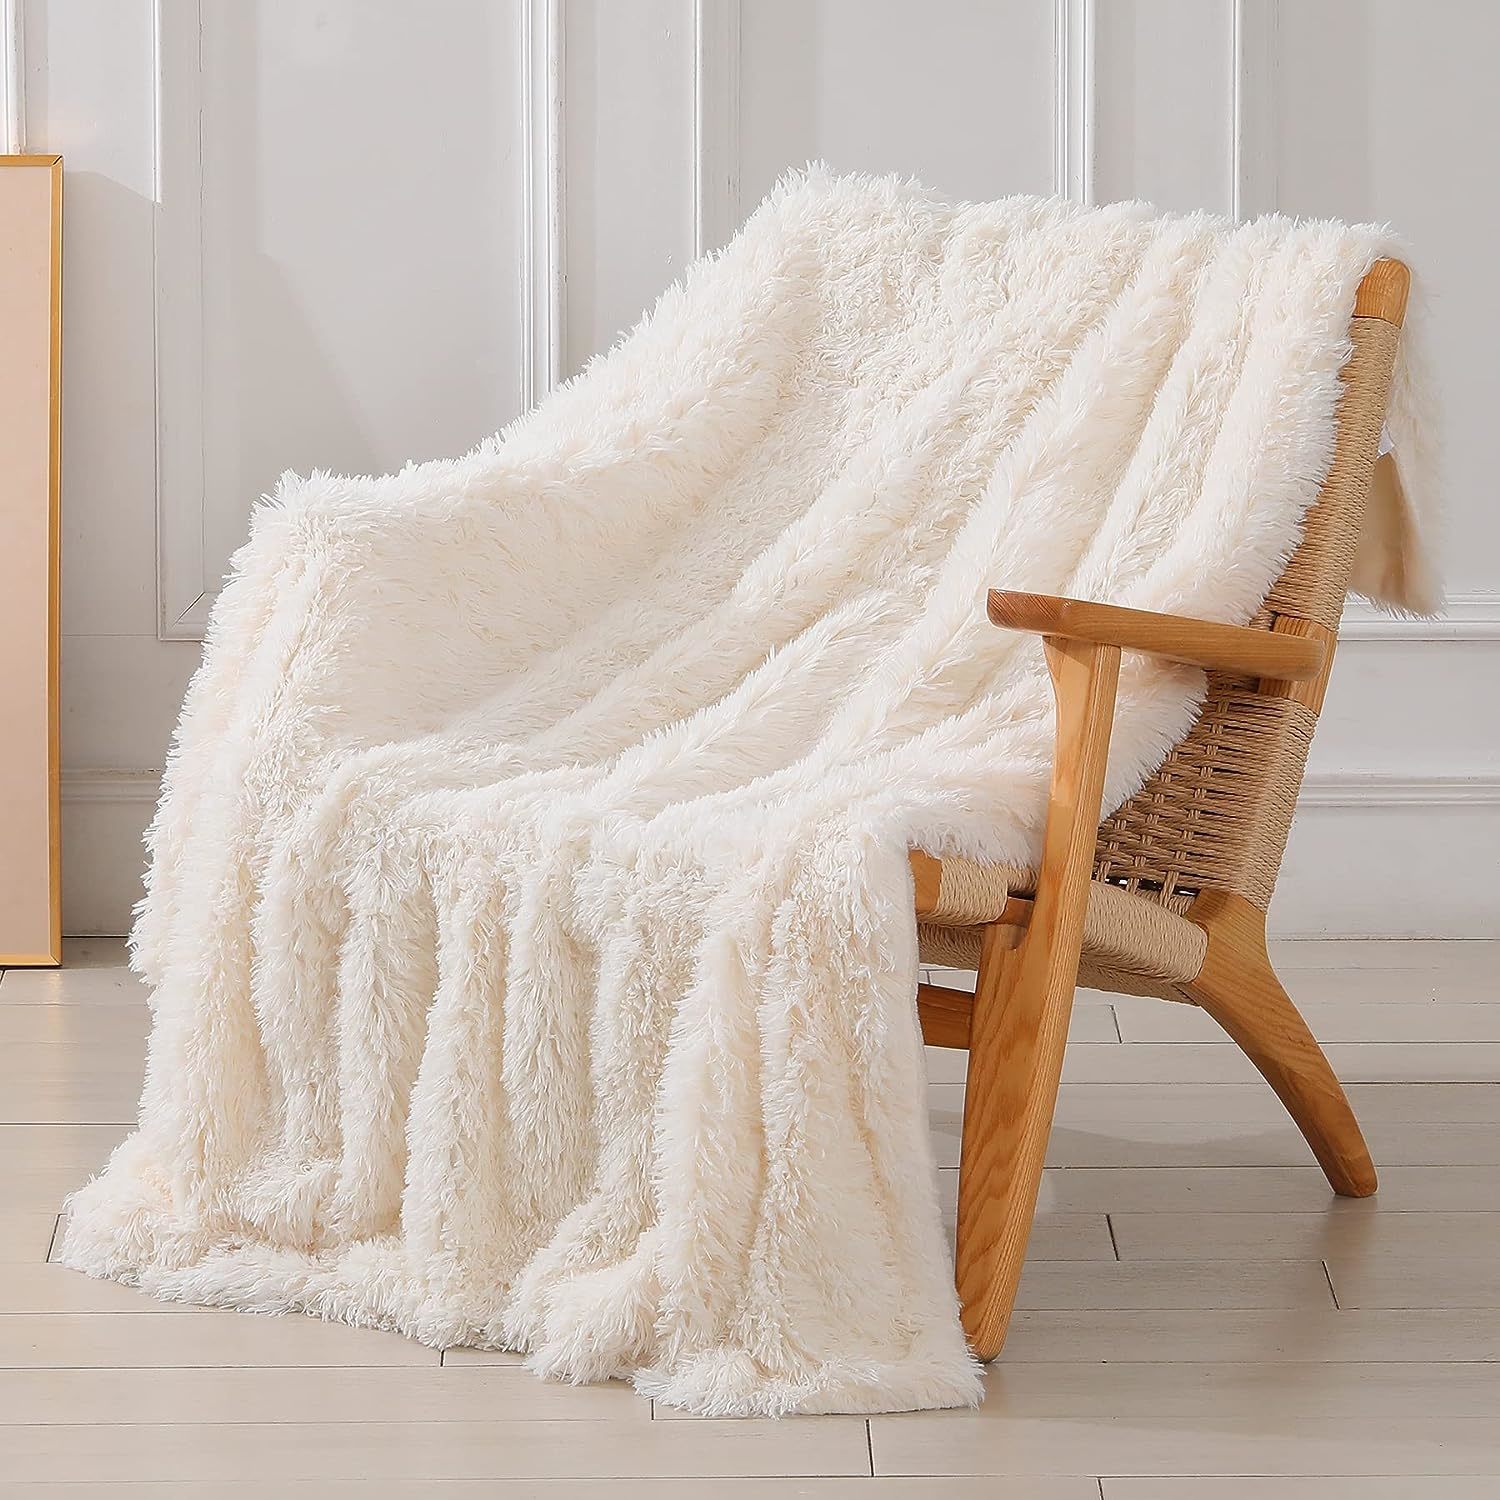 Primary image for Fluffy Cozy Plush Comfy Microfiber Fleece Blankets For Couch Sofa Bedroom, Cream